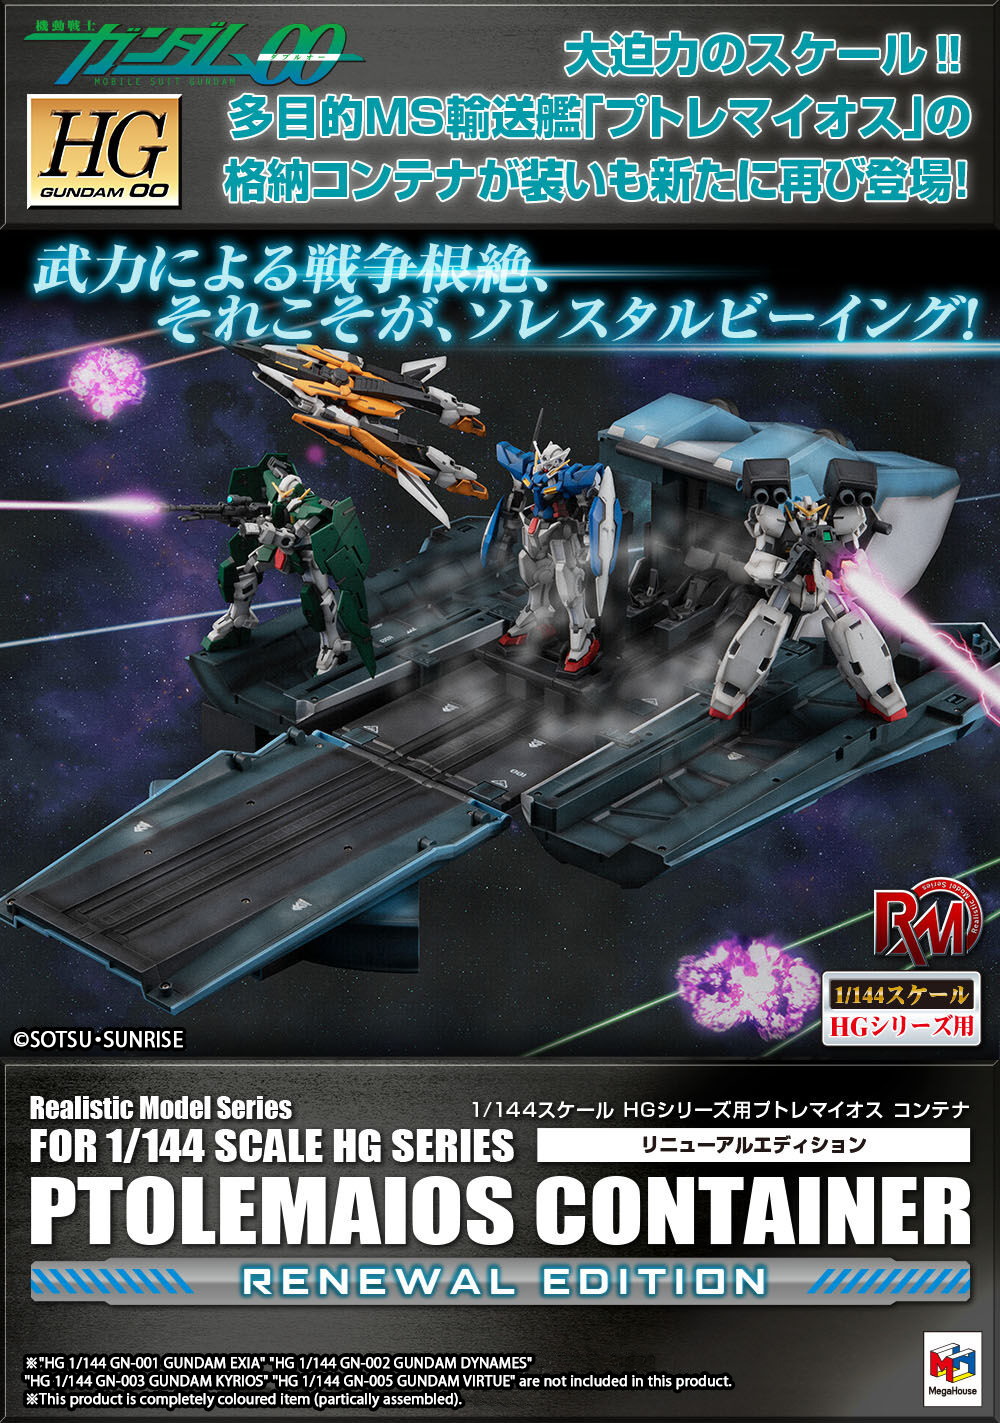  REALISTIC MODEL SERIES MOBILE SUIT GUNDAM 00 (1/144 HG SERIES) PTOLEMY CONTAINER (RENEWAL EDITION) 